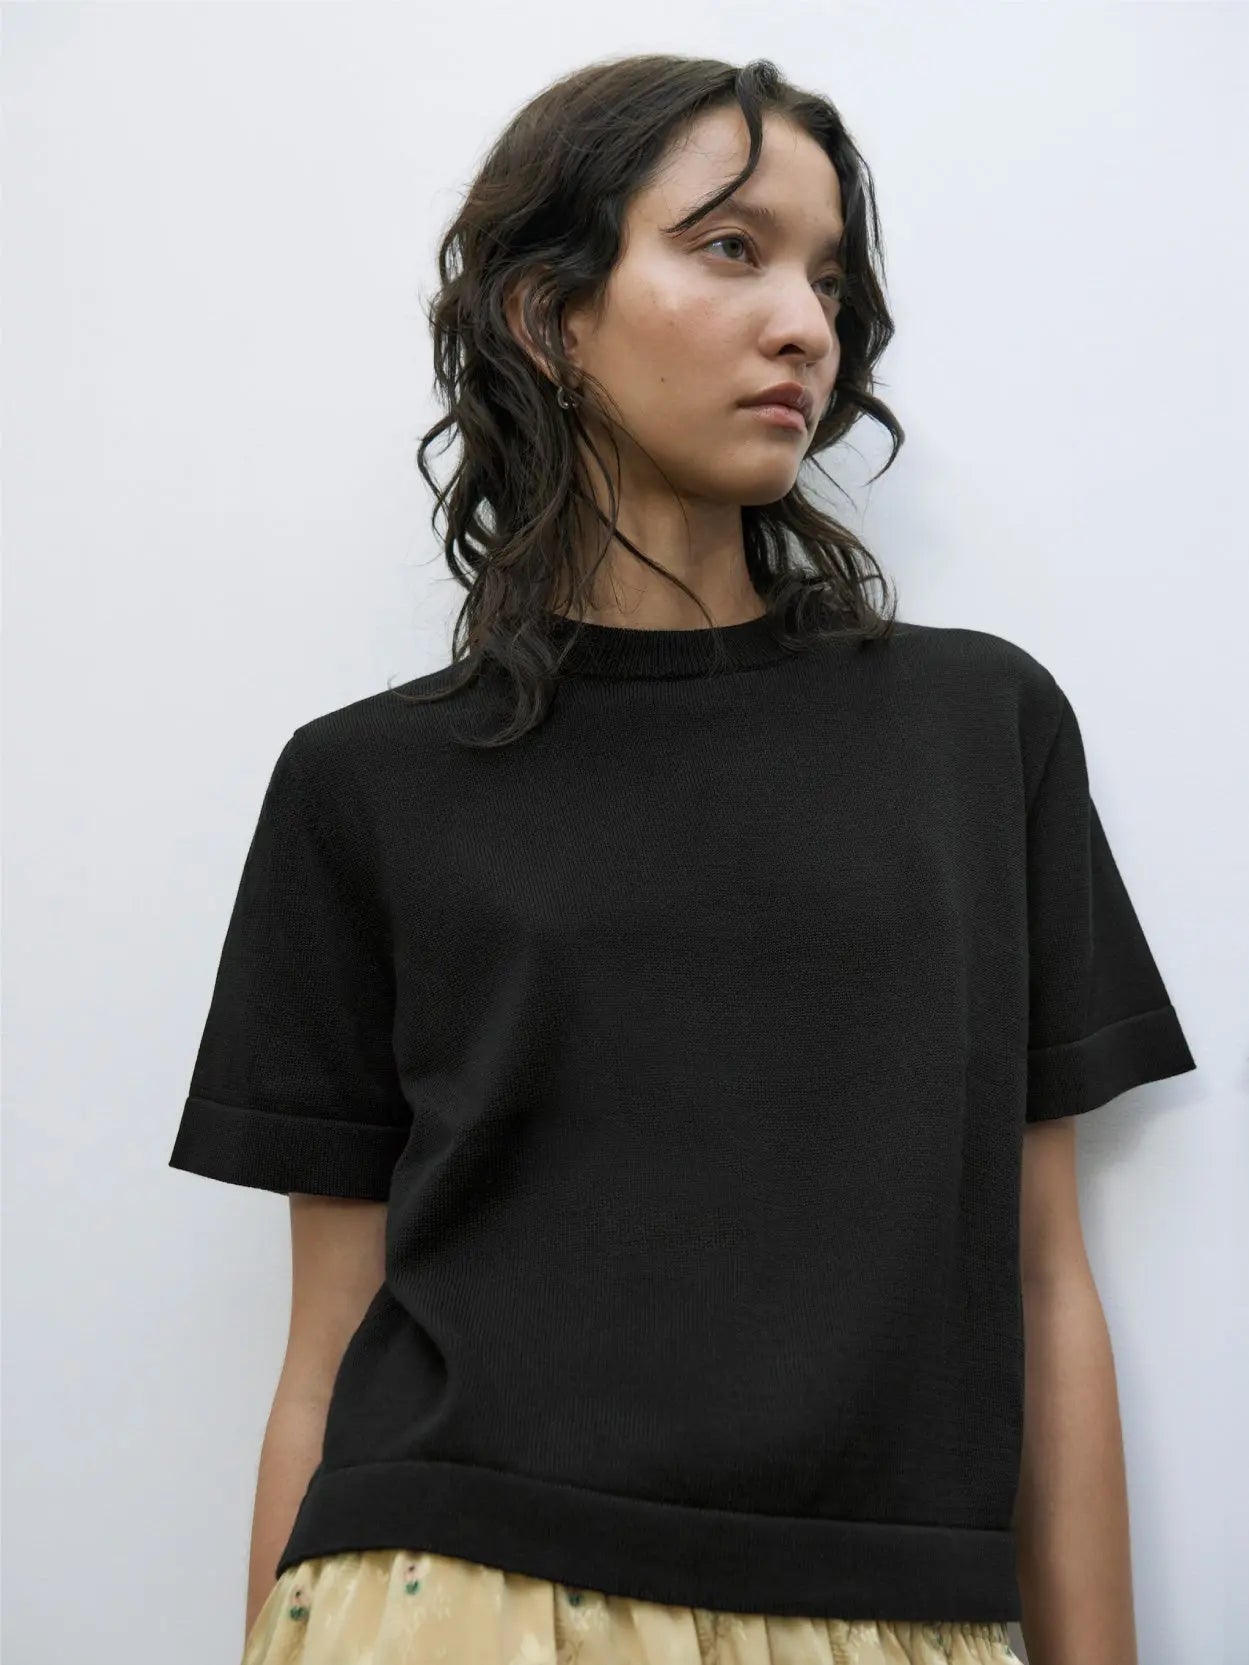 A Cordera Cotton T-Shirt Black is displayed on a white background. The shirt features a round neckline and a simple, classic design with no visible logos or patterns, perfect for your next visit to BassalStore in Barcelona.